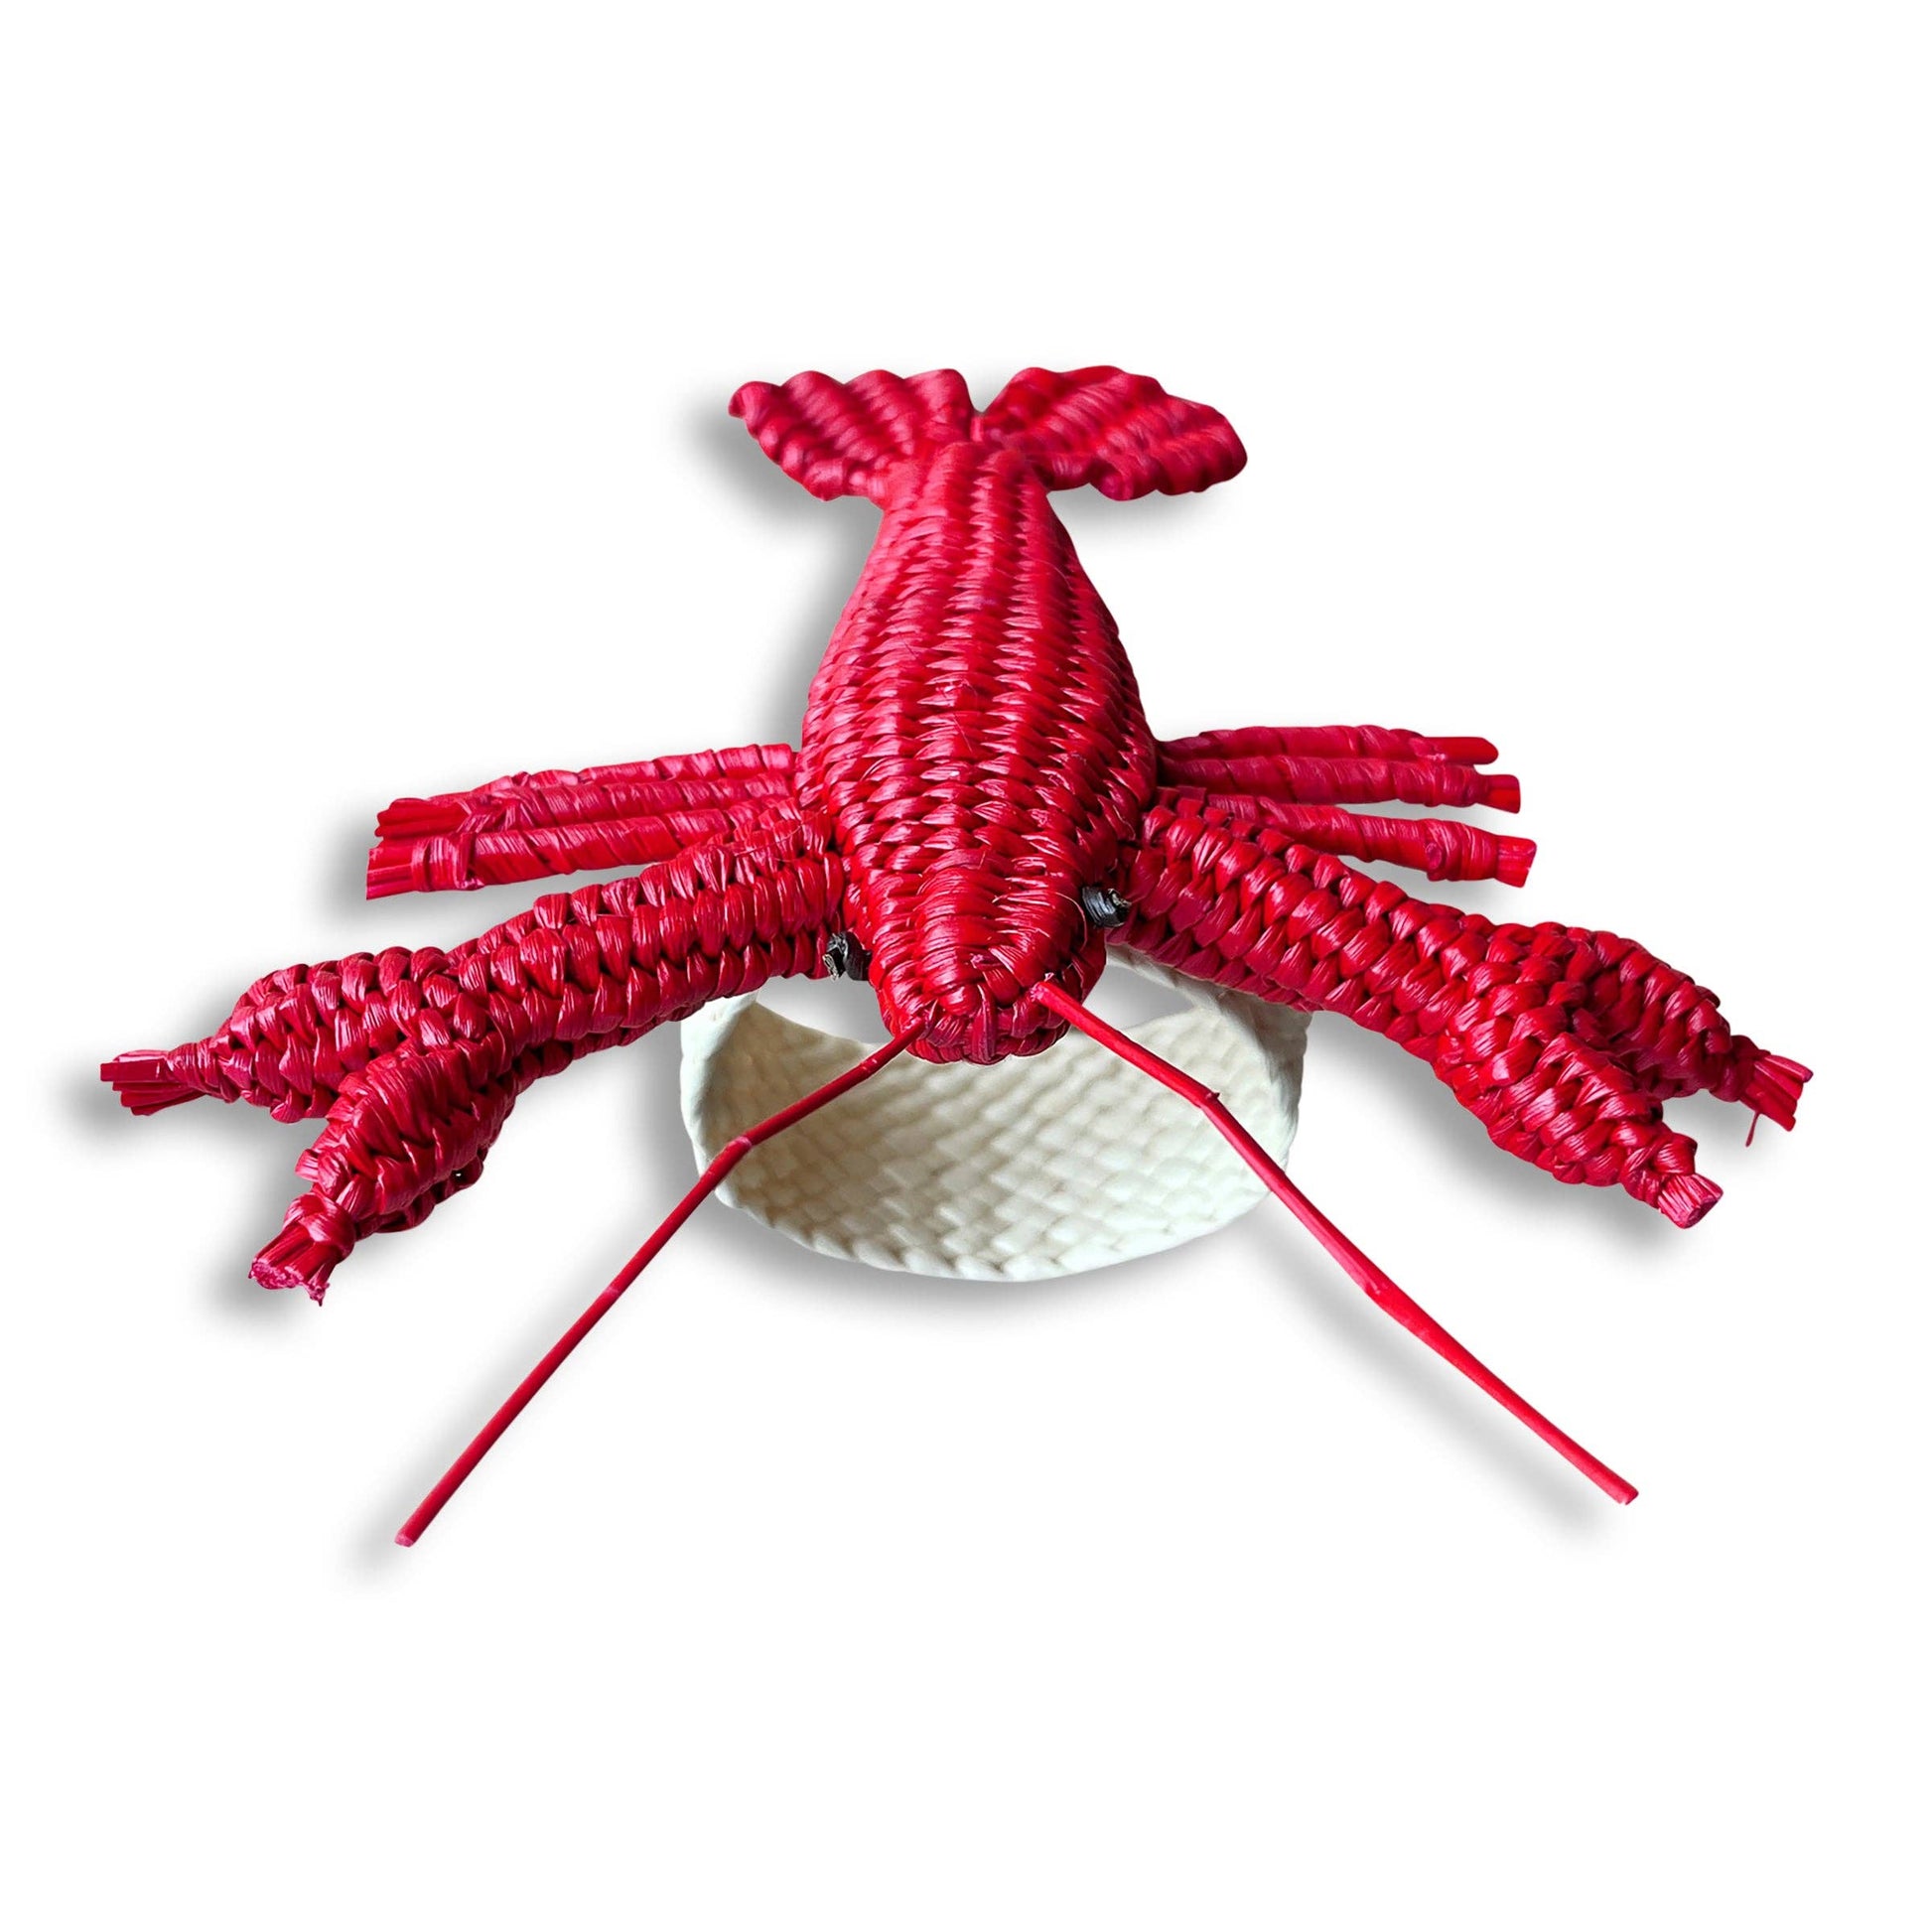 The Every Space Red raffia lobster napkin ring by Furbish Studio - handmade in Columbia